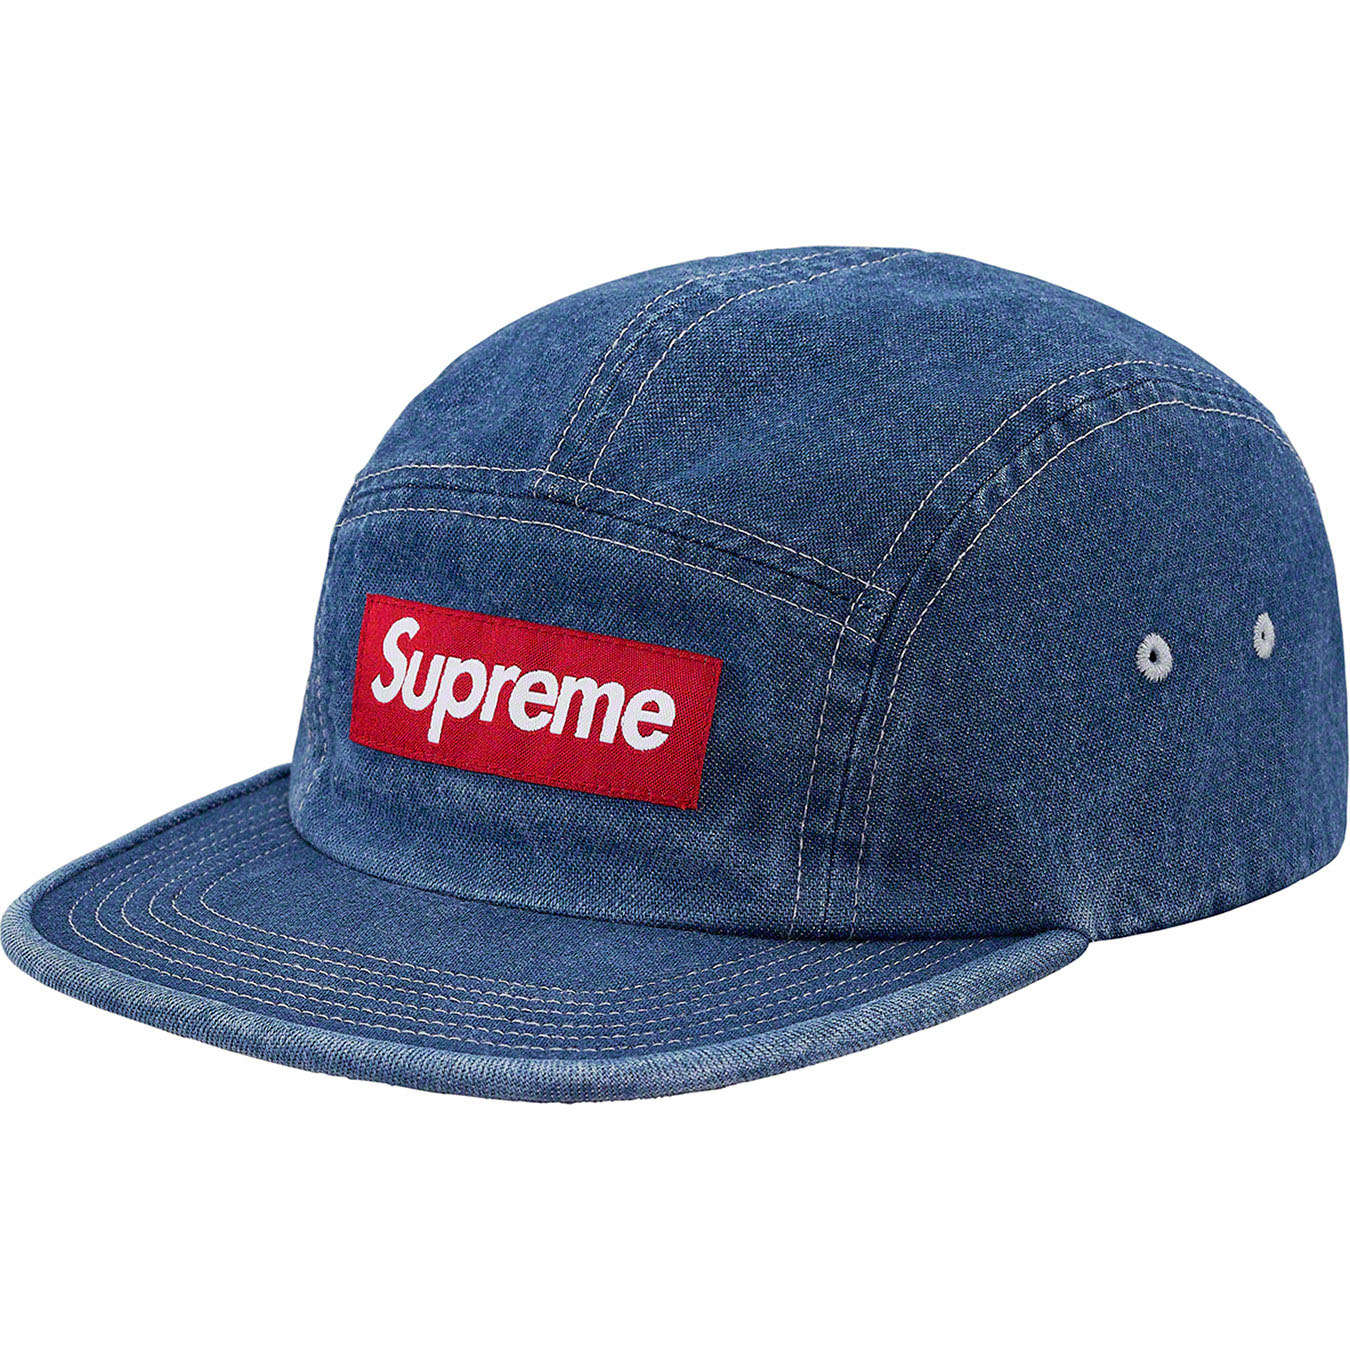 Washed Chino Twill Camp Cap | Supreme 19ss